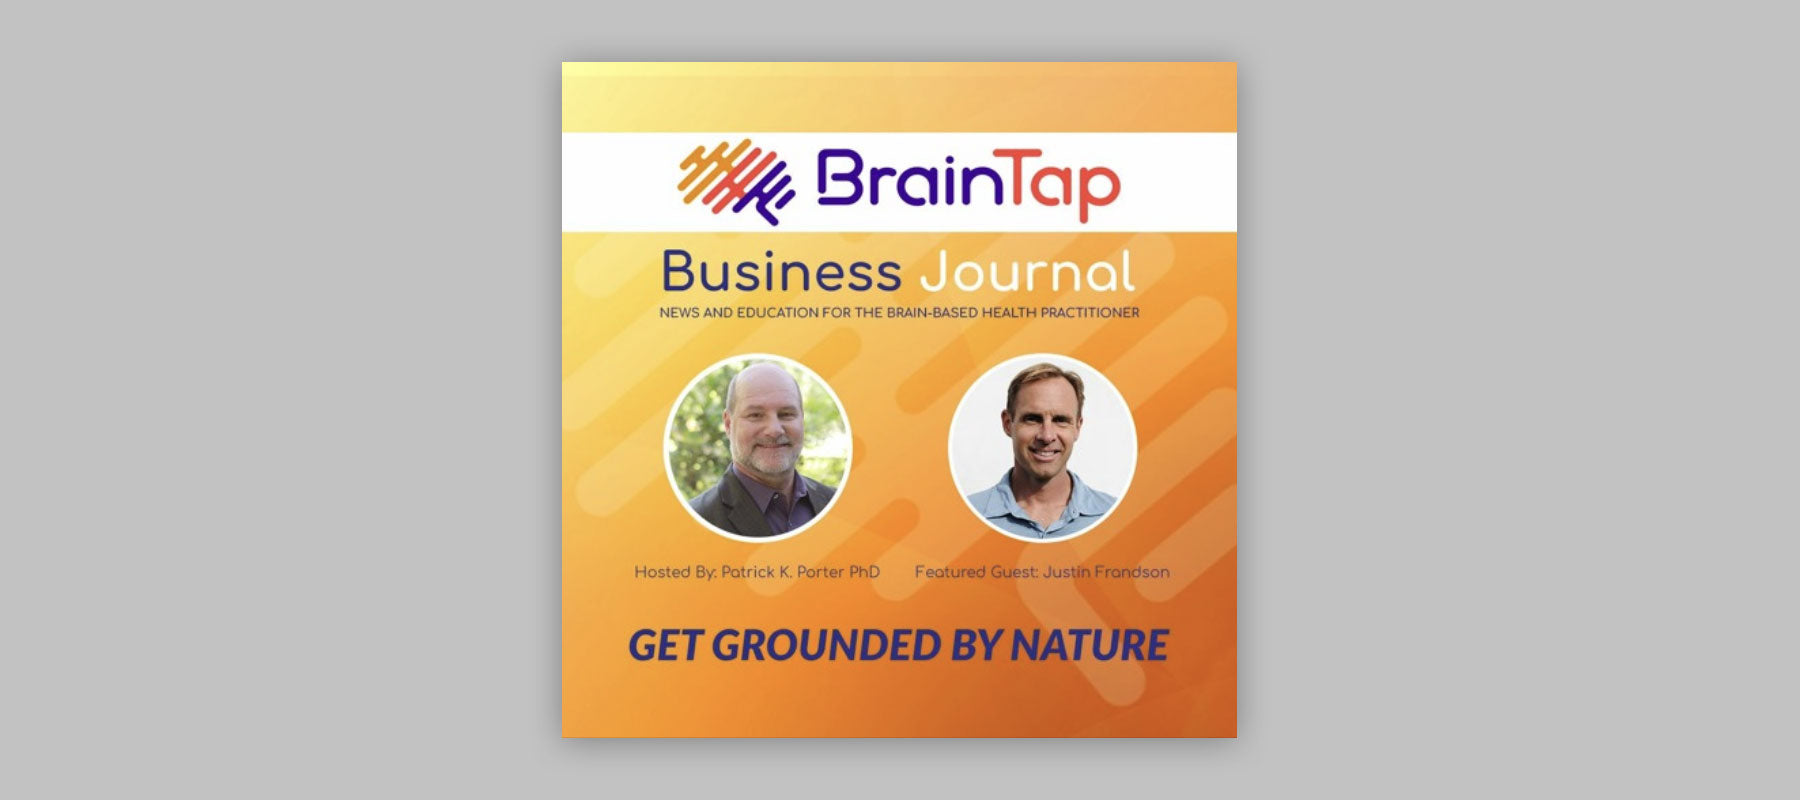 Get Grounded by Nature BrainTap Business Journal